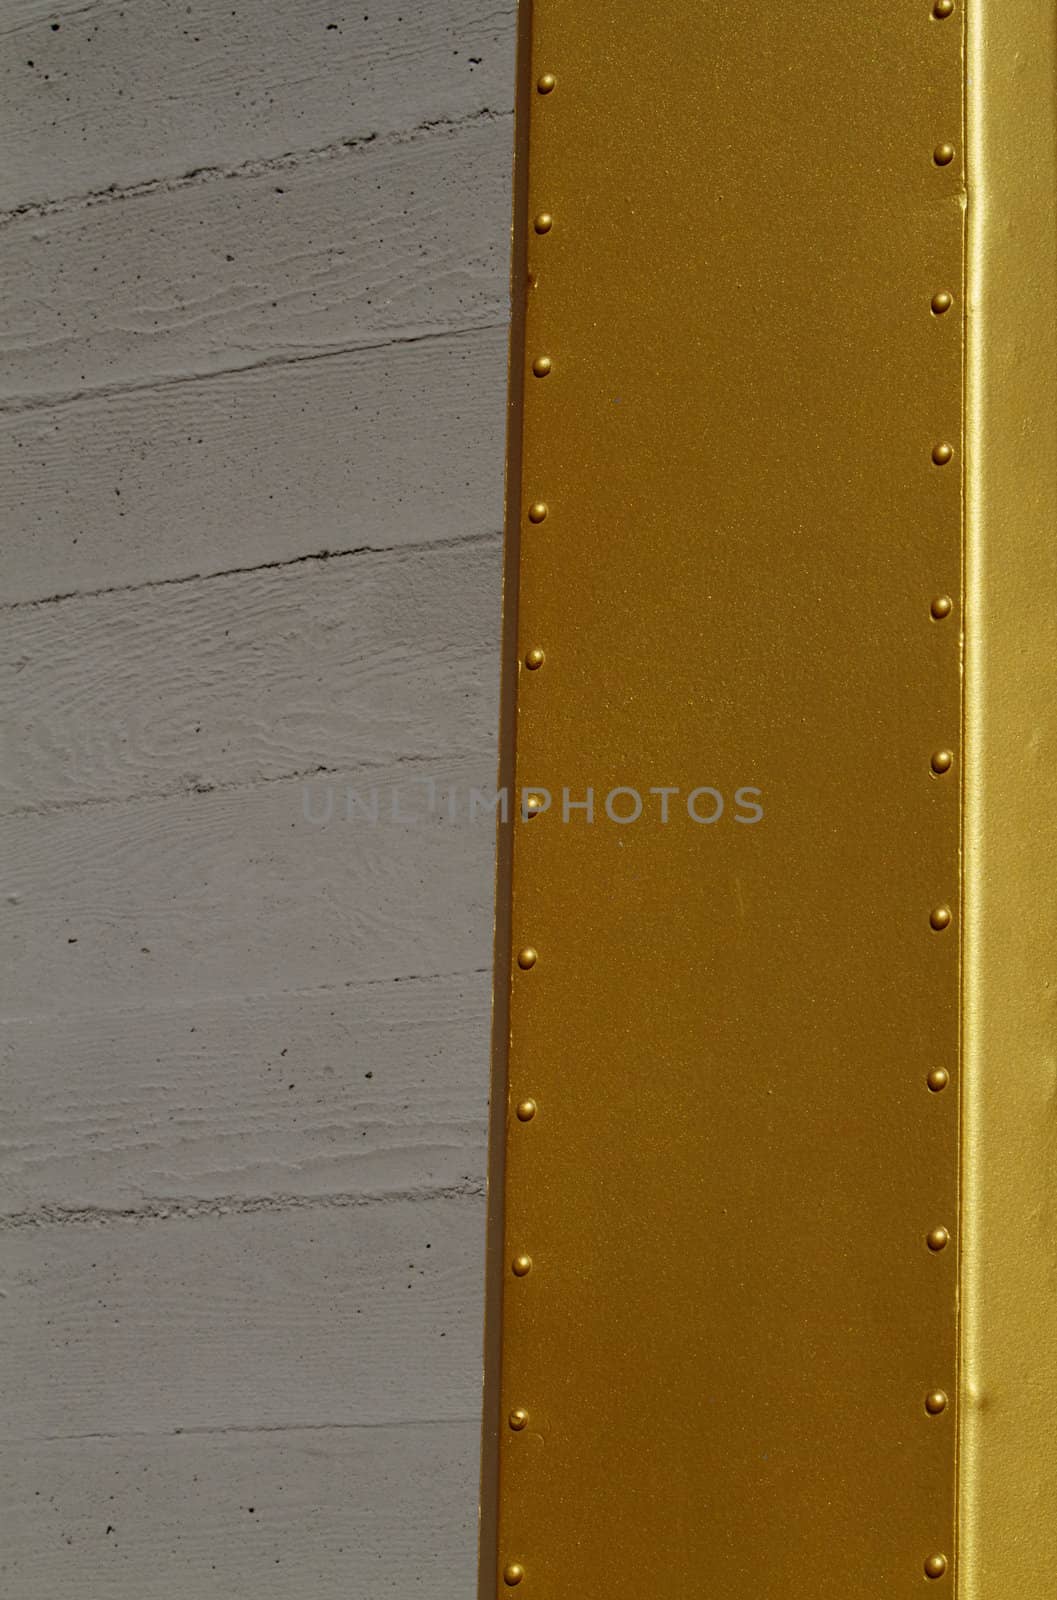 Gold and Concrete Wall by bobkeenan